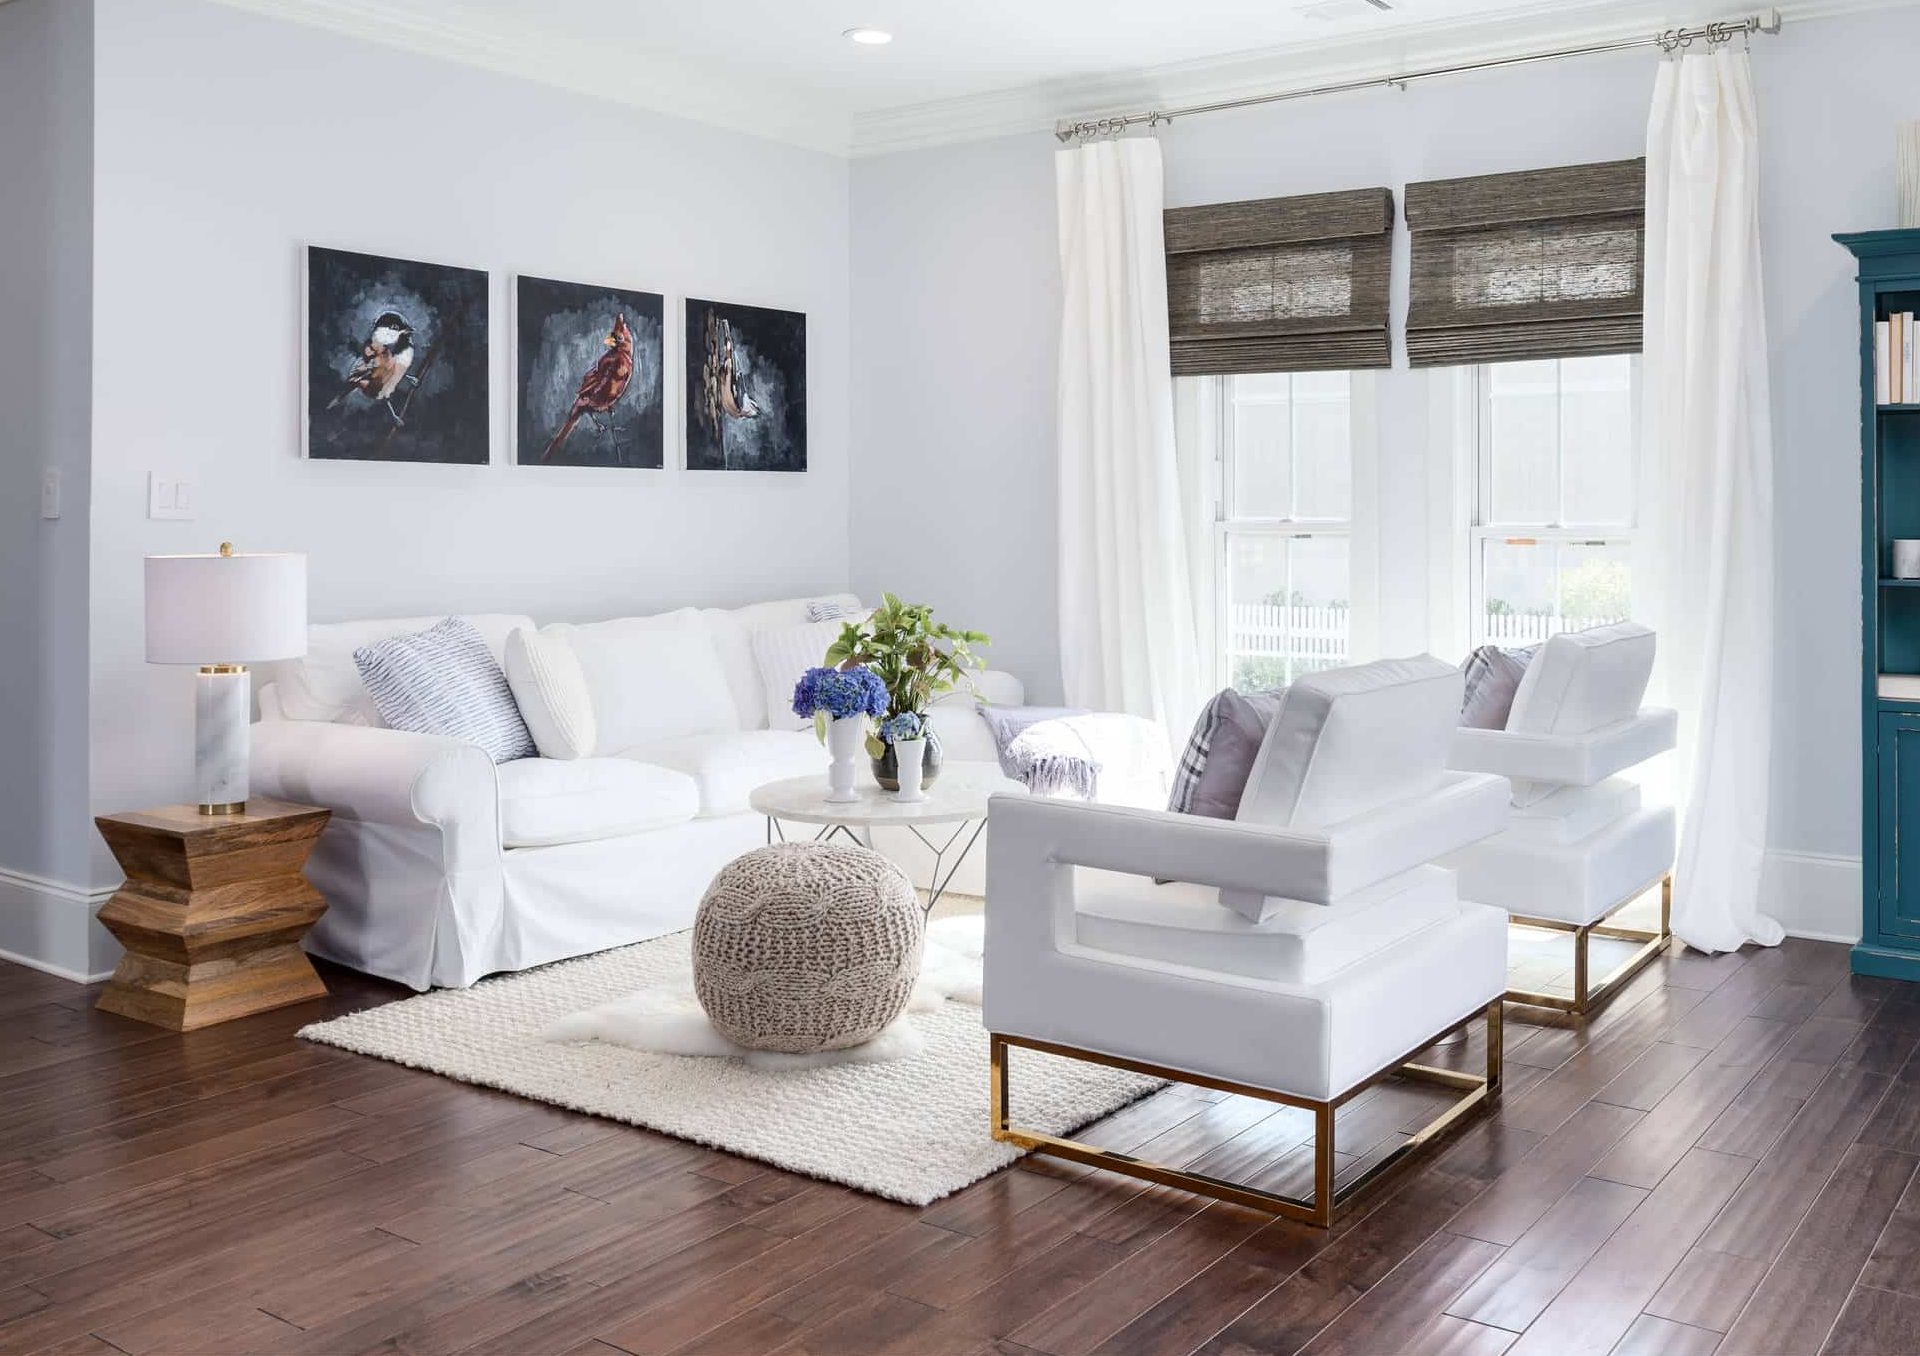 What Color Rug Should I Use For Dark Wood Floors? [ANSWERED] Decor Snob